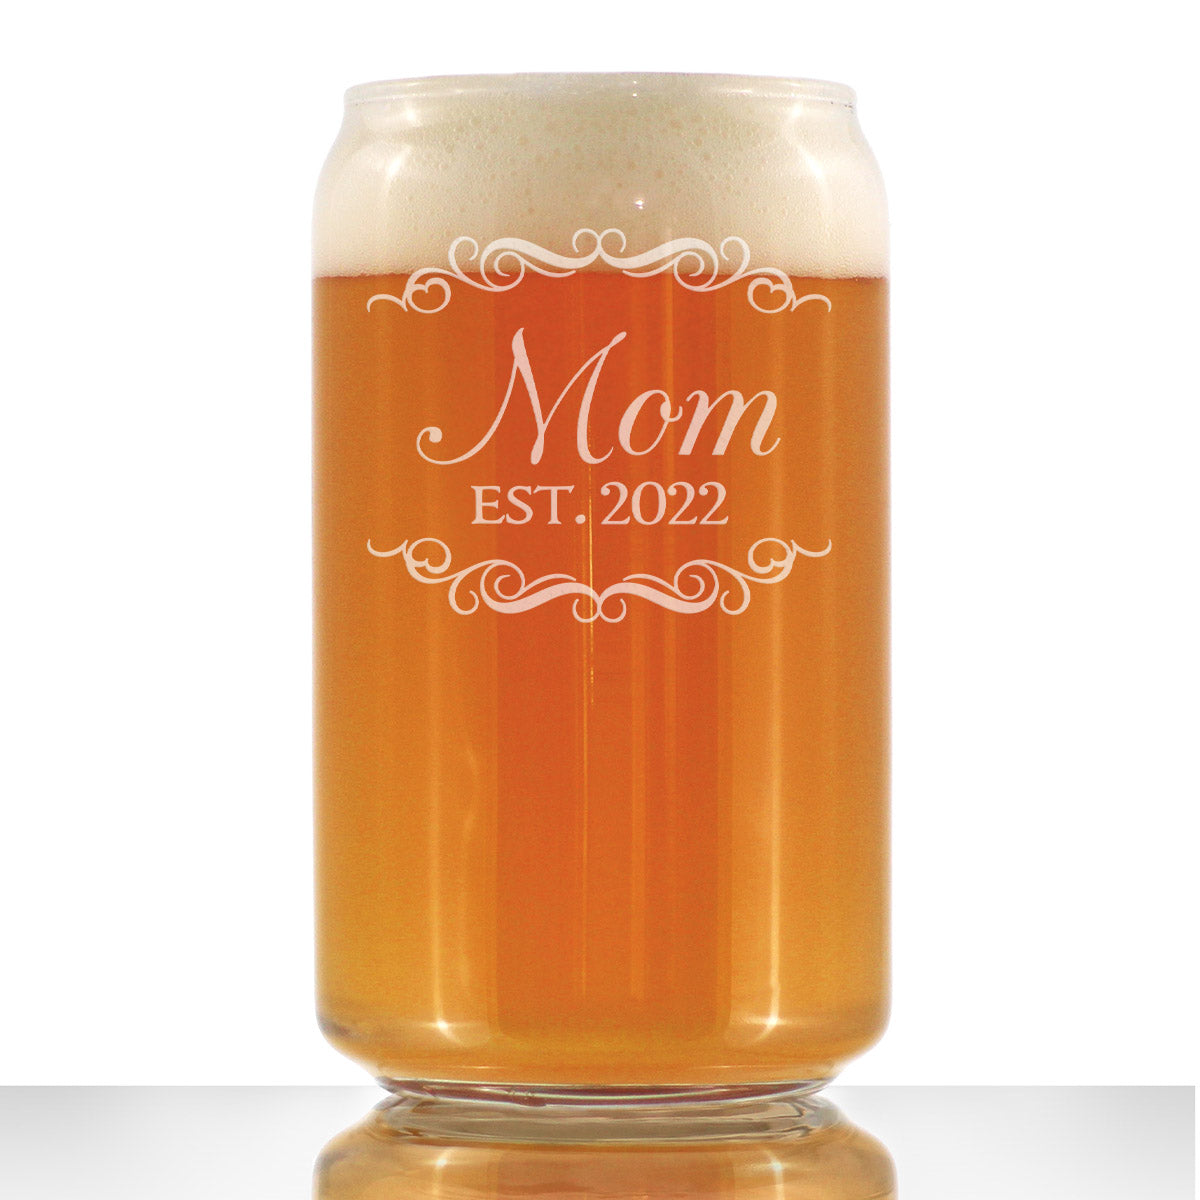 Mom Est 2022 - New Mother Beer Can Pint Glass Gift for First Time Parents - Decorative 16 Oz Glasses